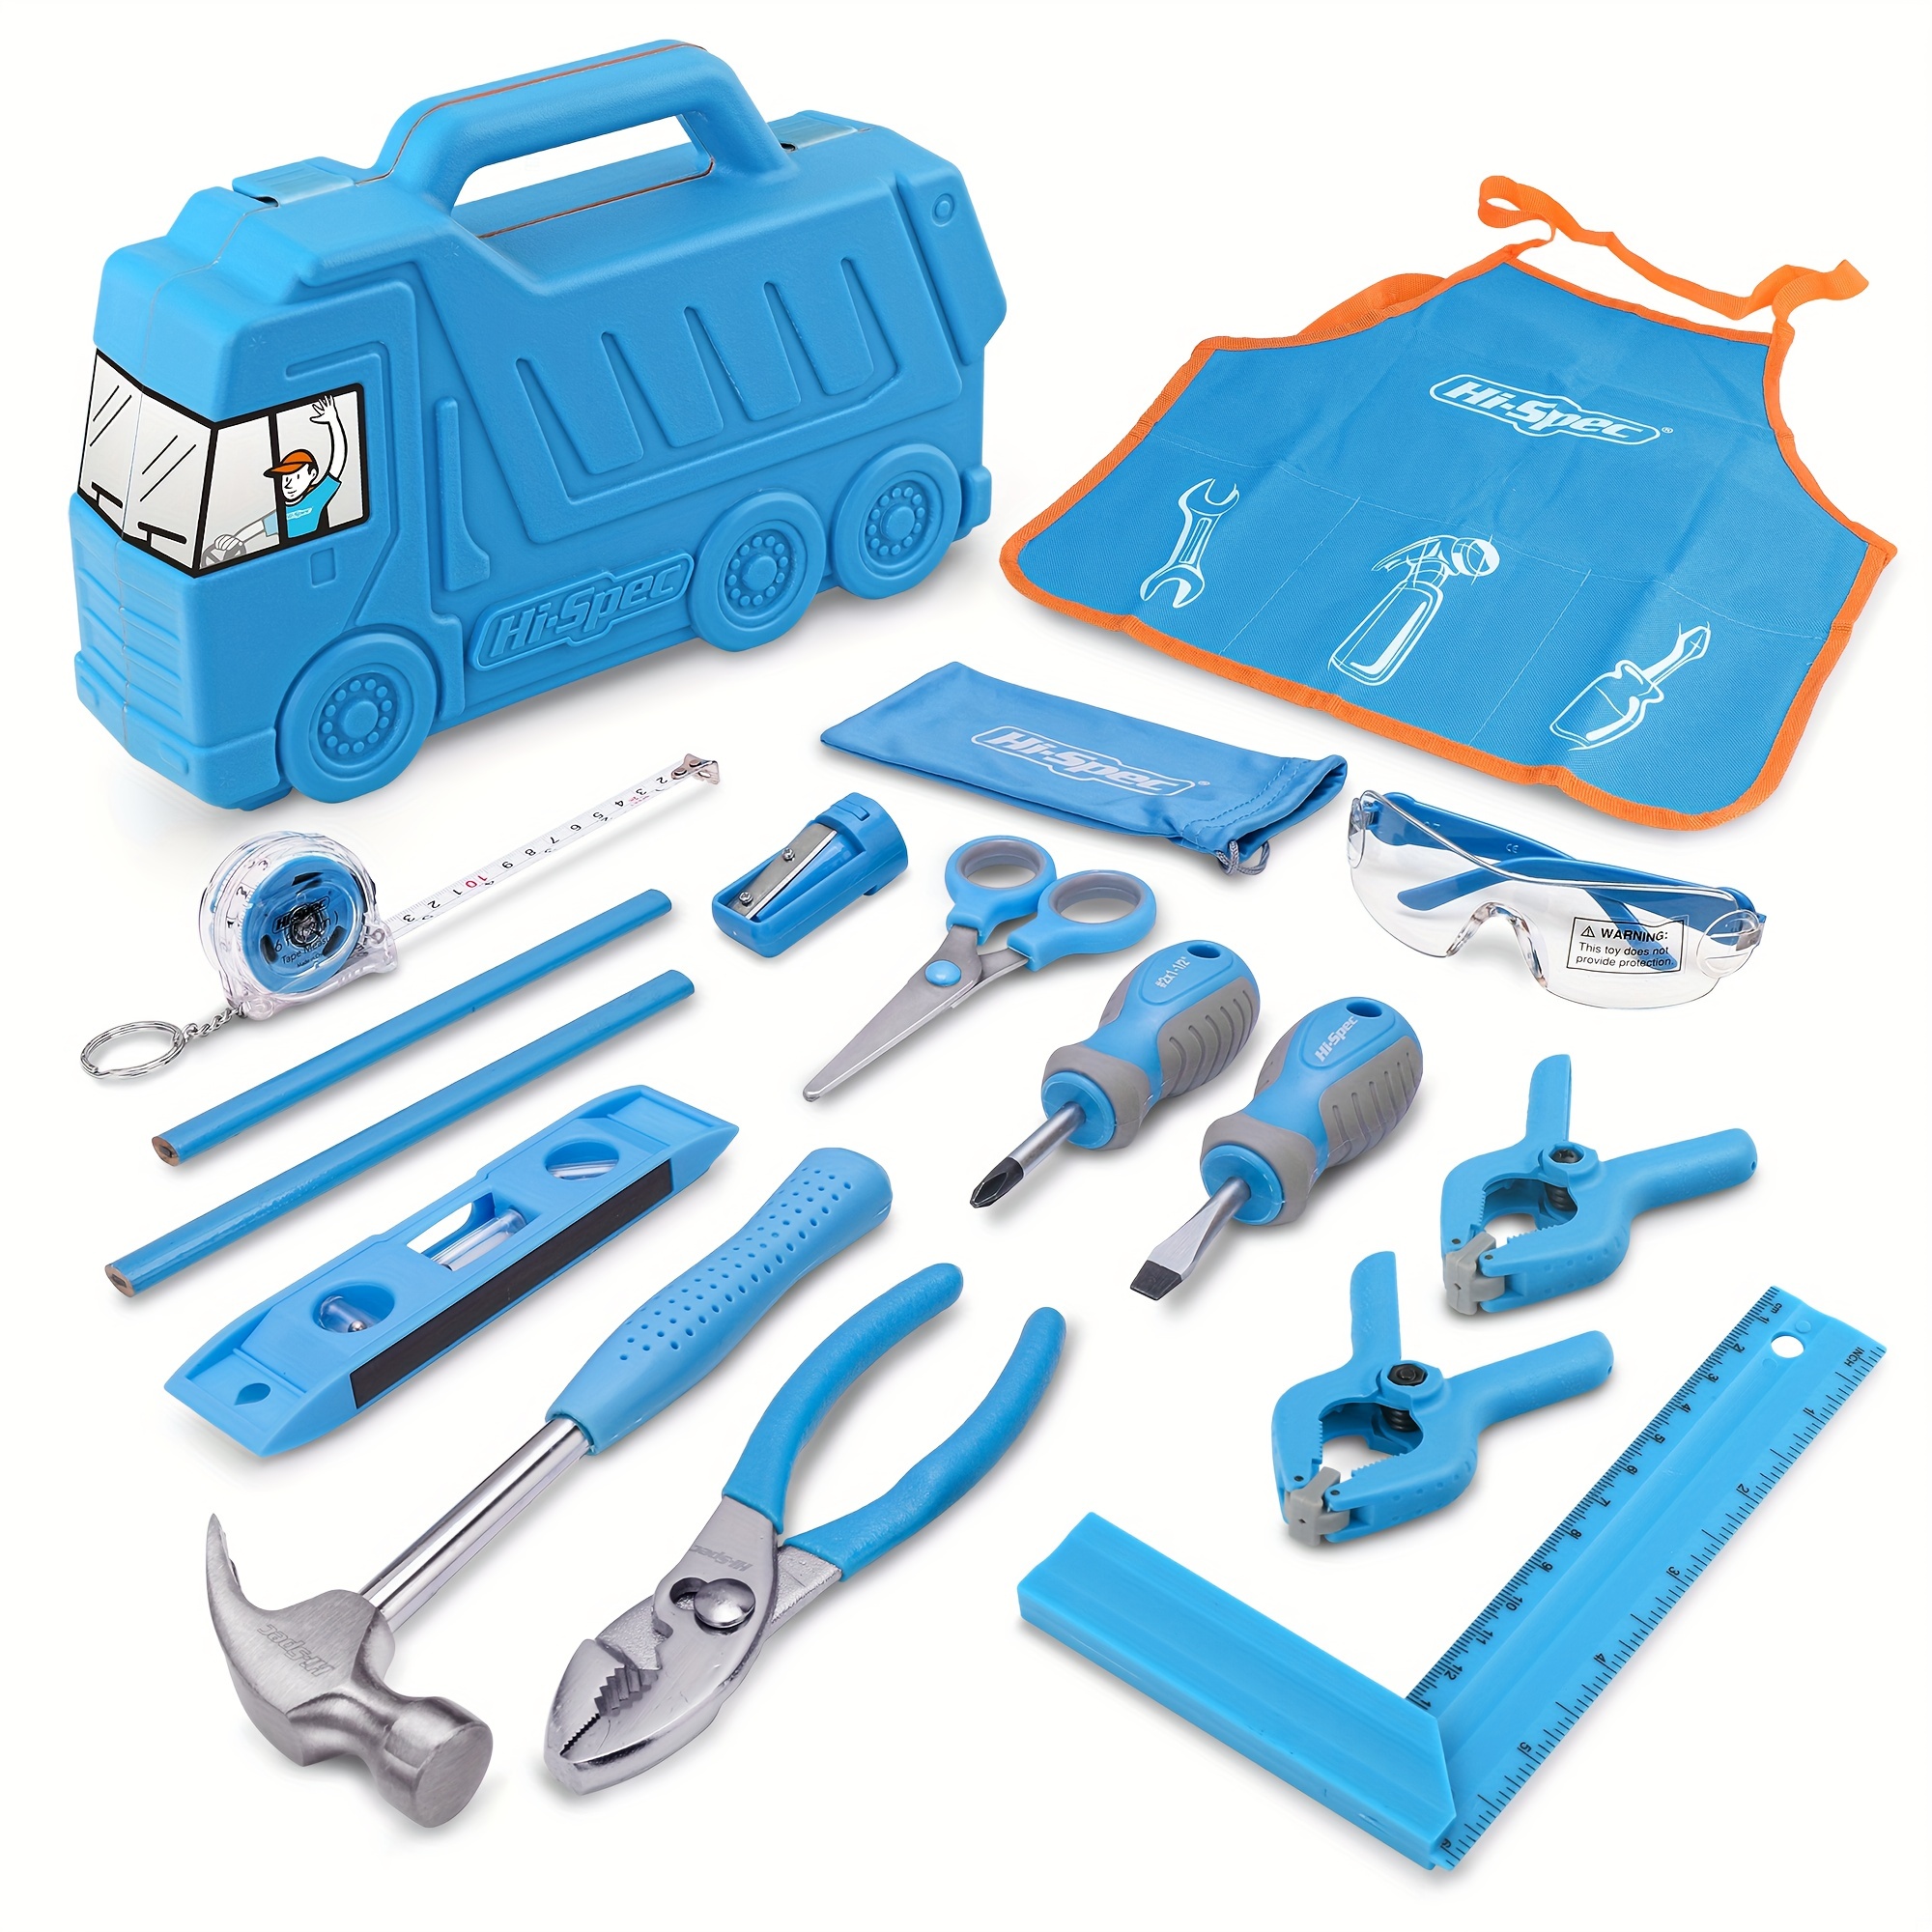 Hi-Spec 17 Piece Kids Tool Kit with Blue Truck Tool Box Kids Apron with Pockets Safety Glasses Level Real Small Size Hand Tools